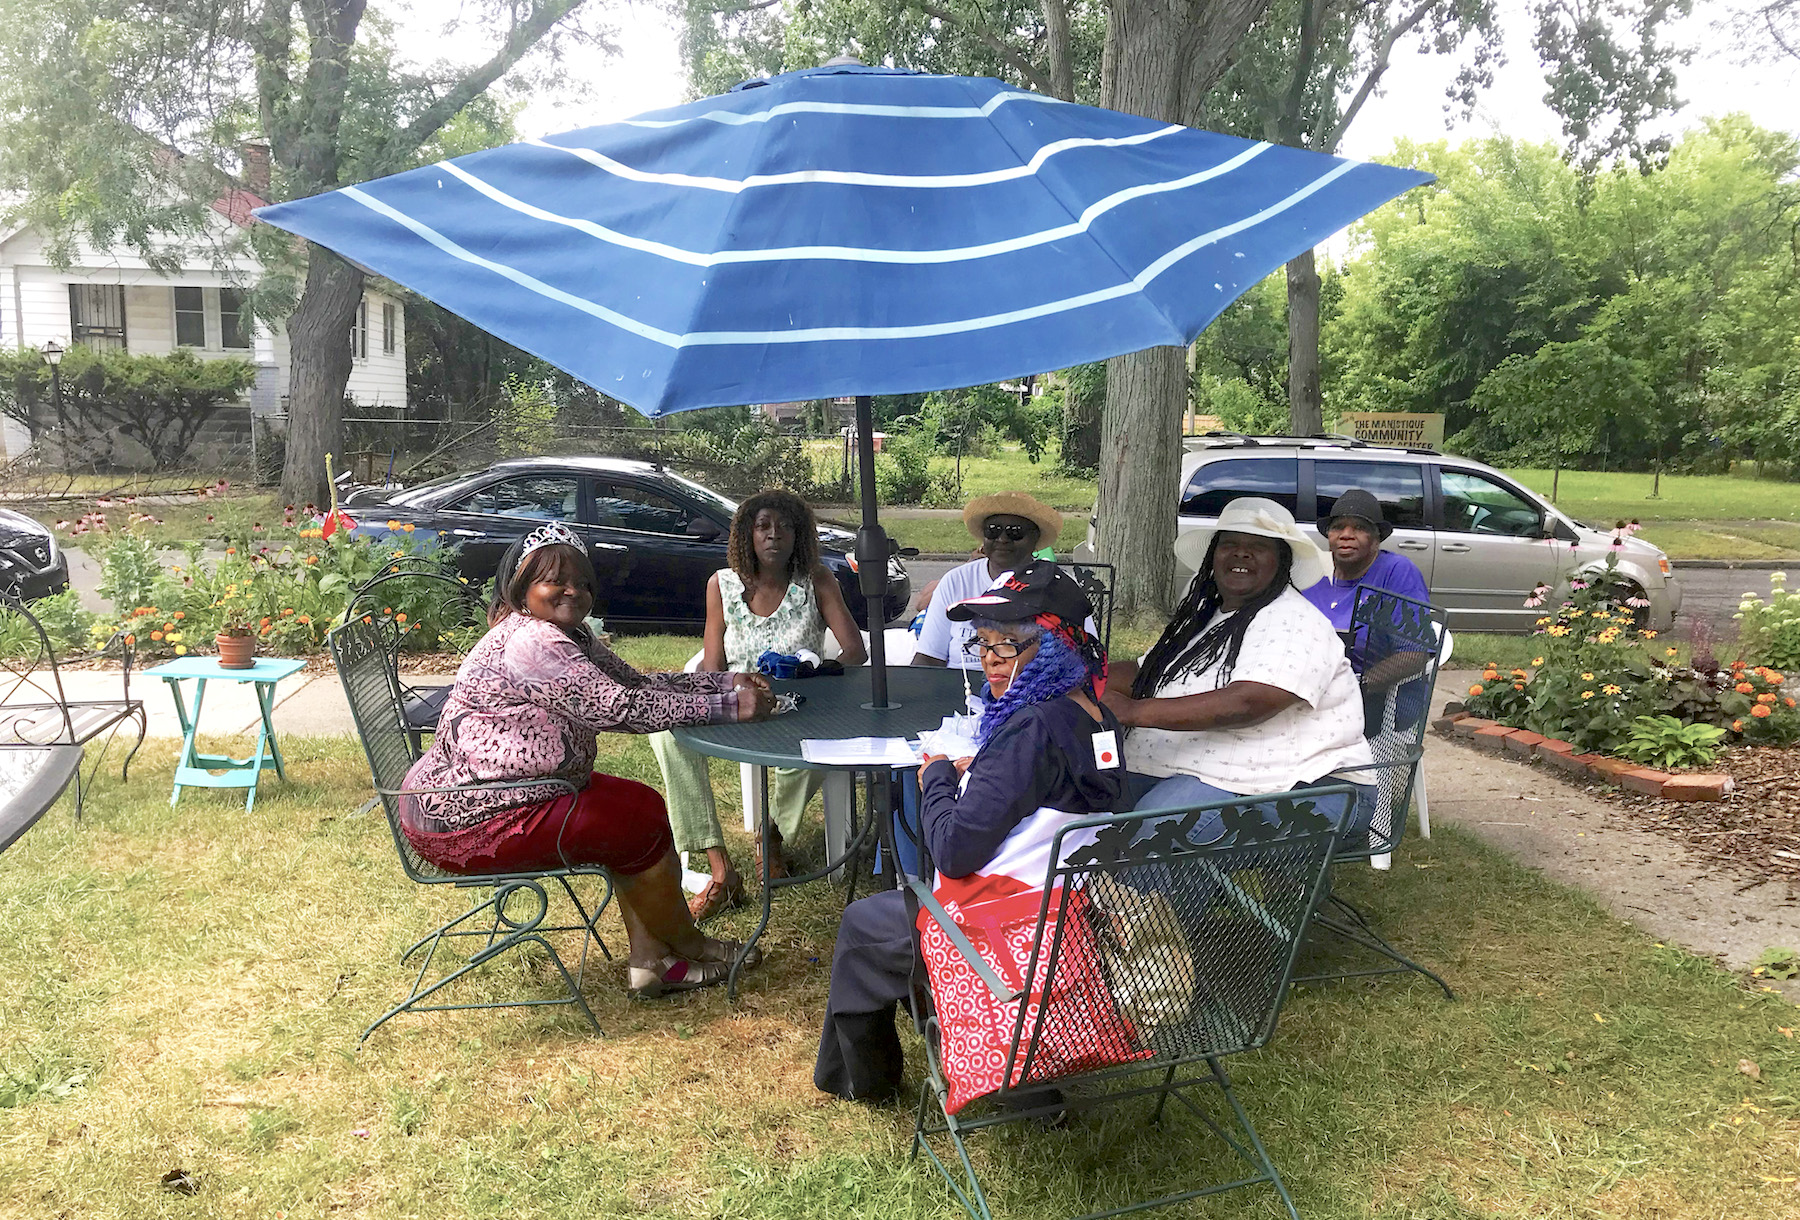 Six Black women sit around a table with big blue umbrella in a grassy yard with several trees